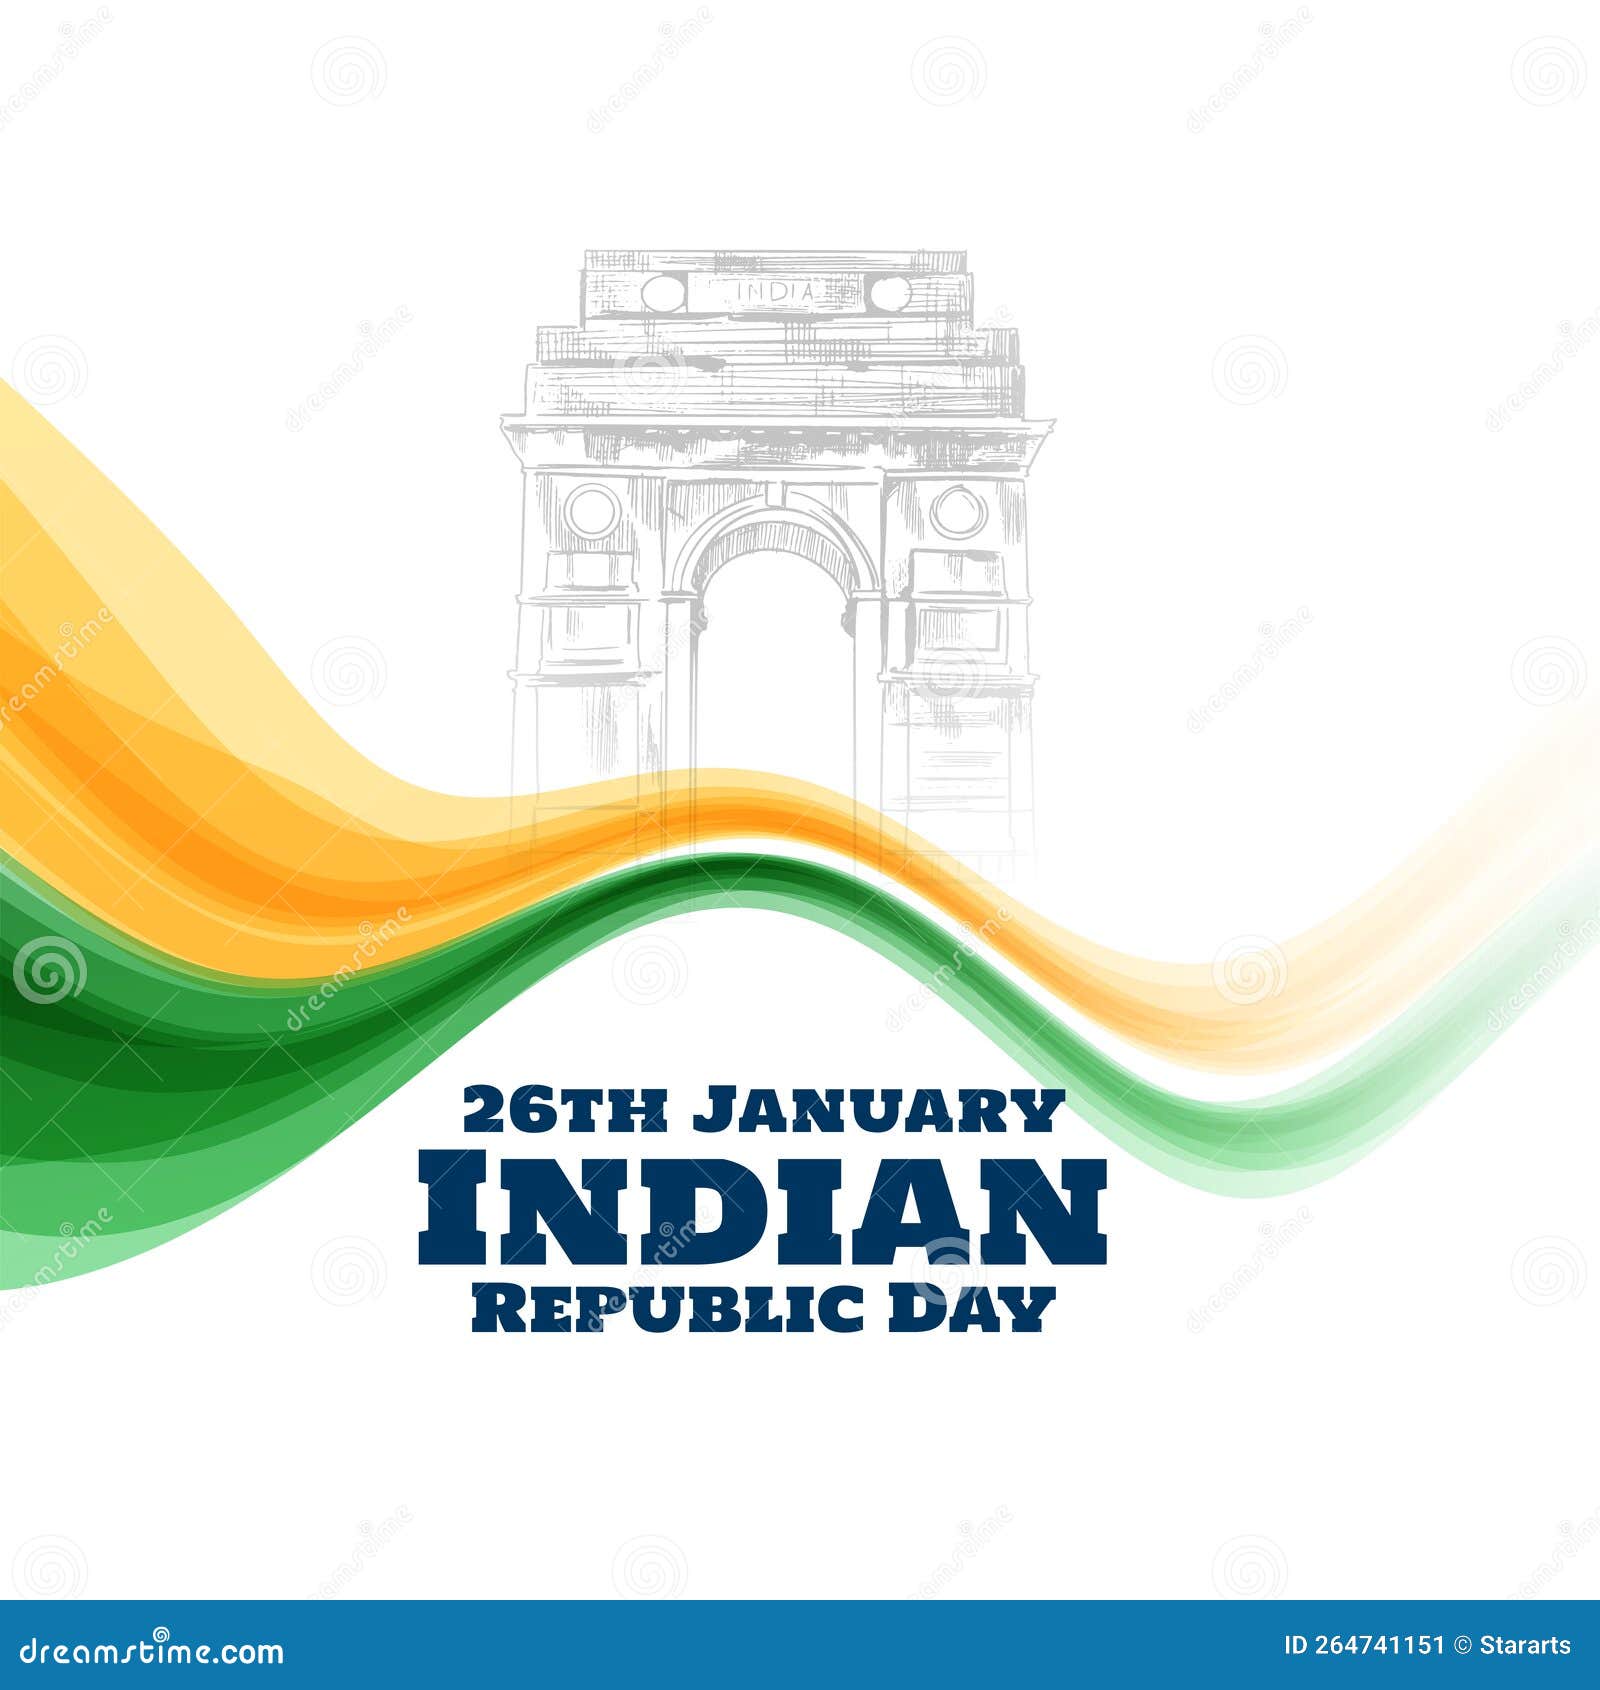 drawing on republic day | republic day drawing easy | drawing for republic  day | republic day - YouTube